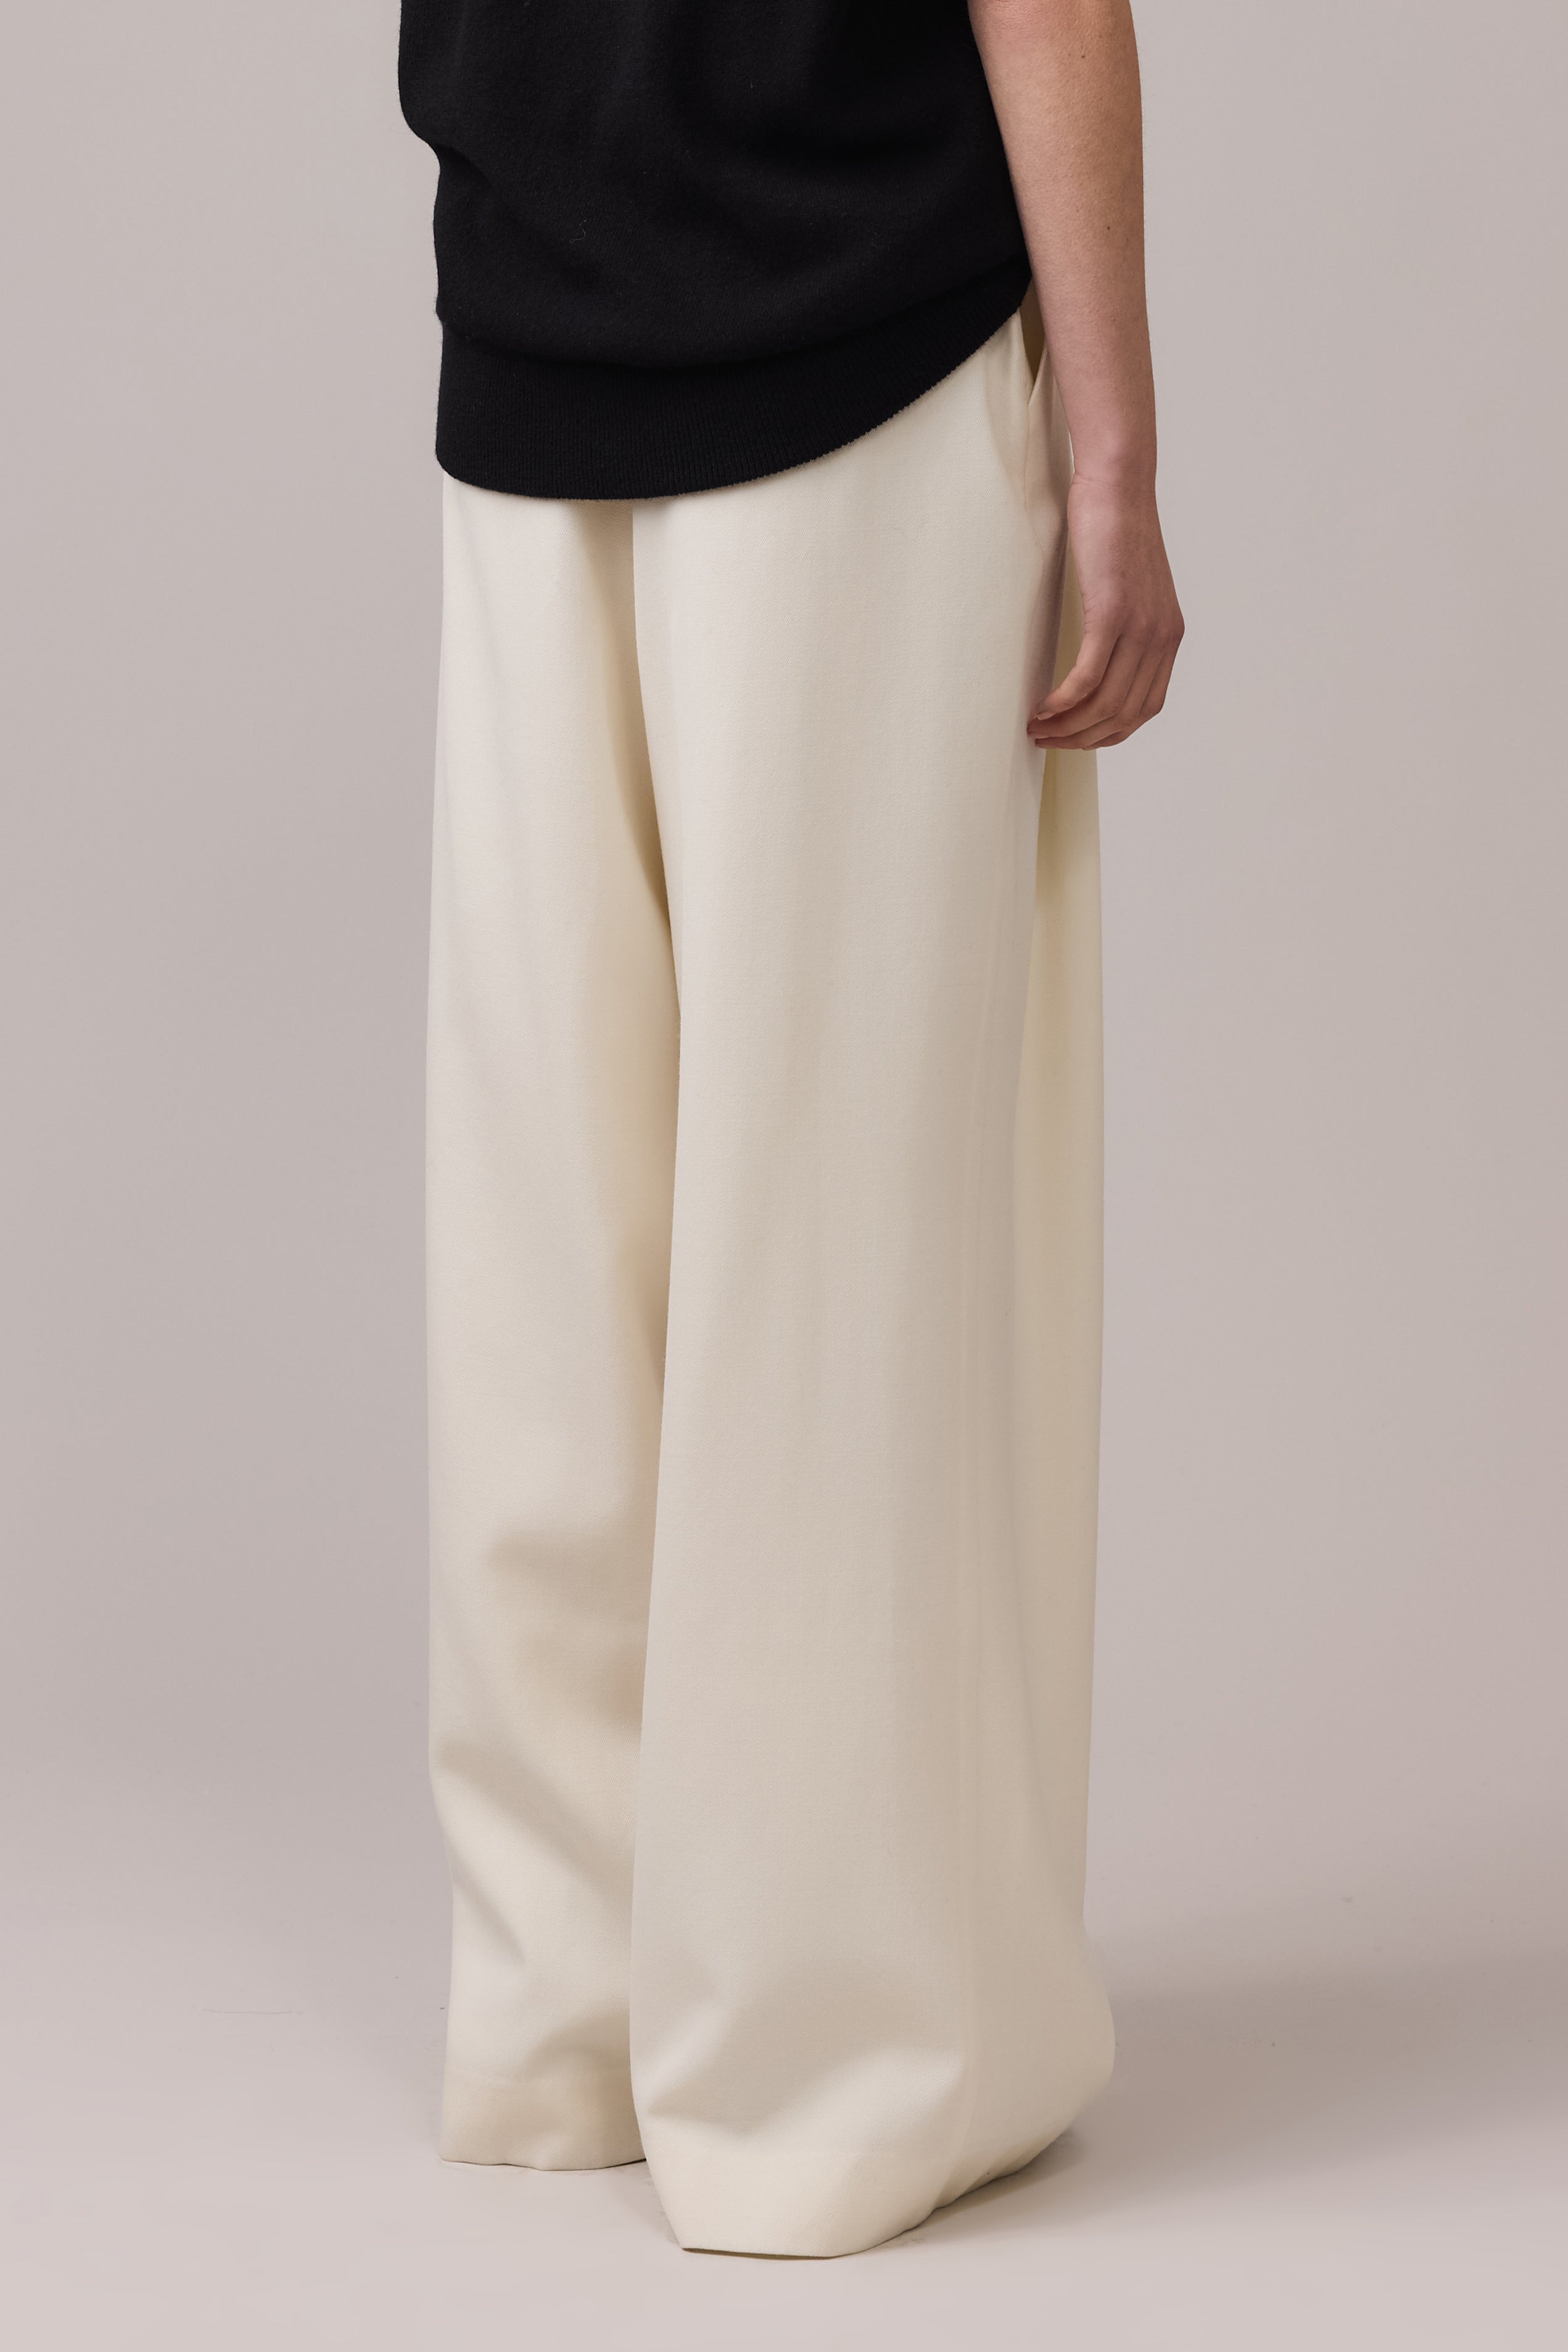 Lucy Wool Low Slung Pant